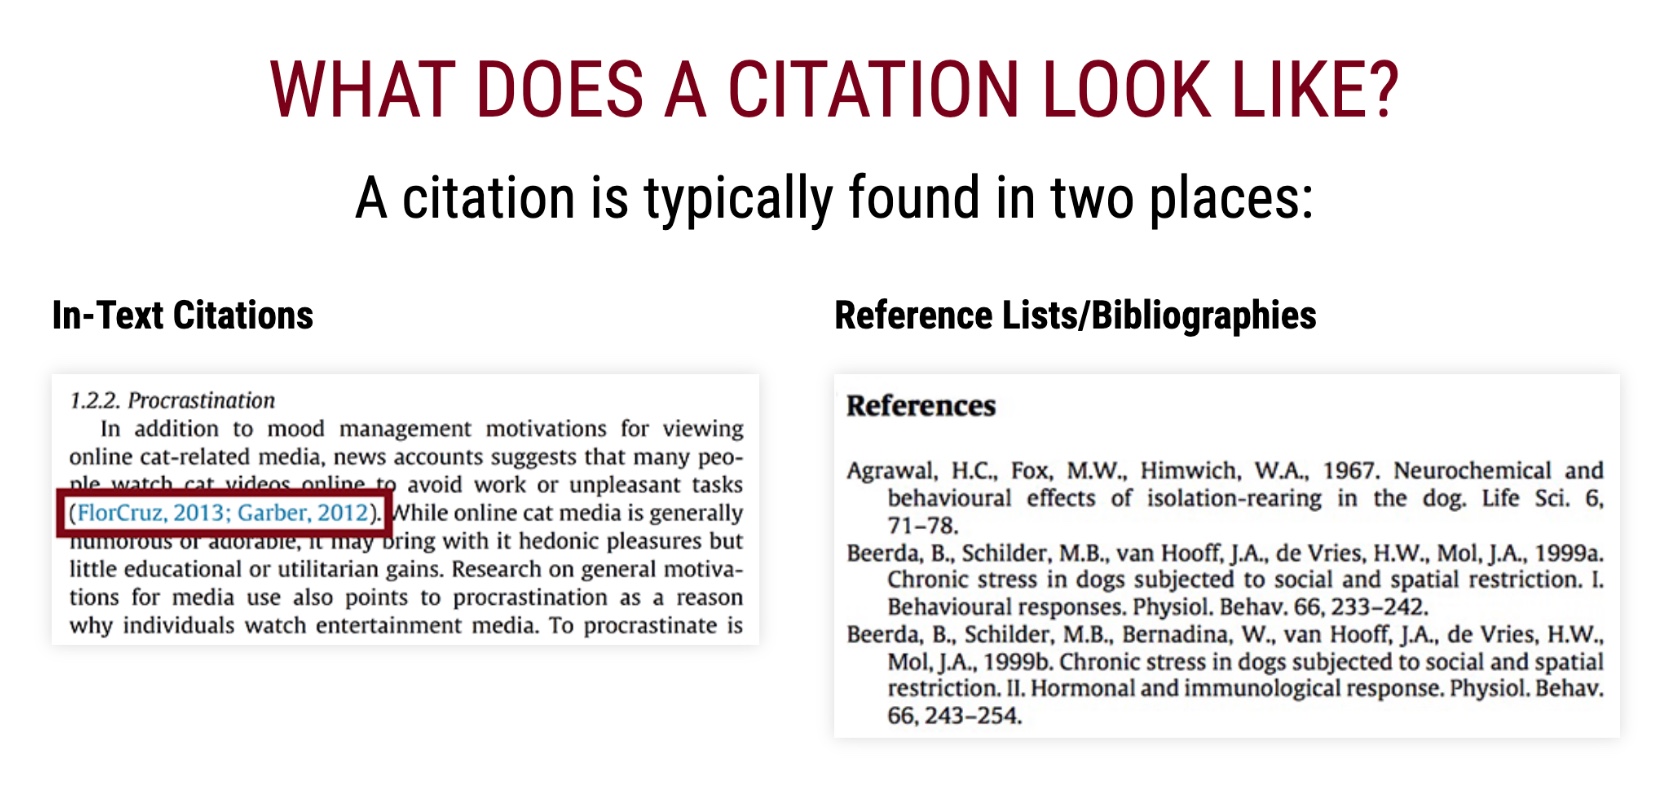 citation means that a particular paper is being